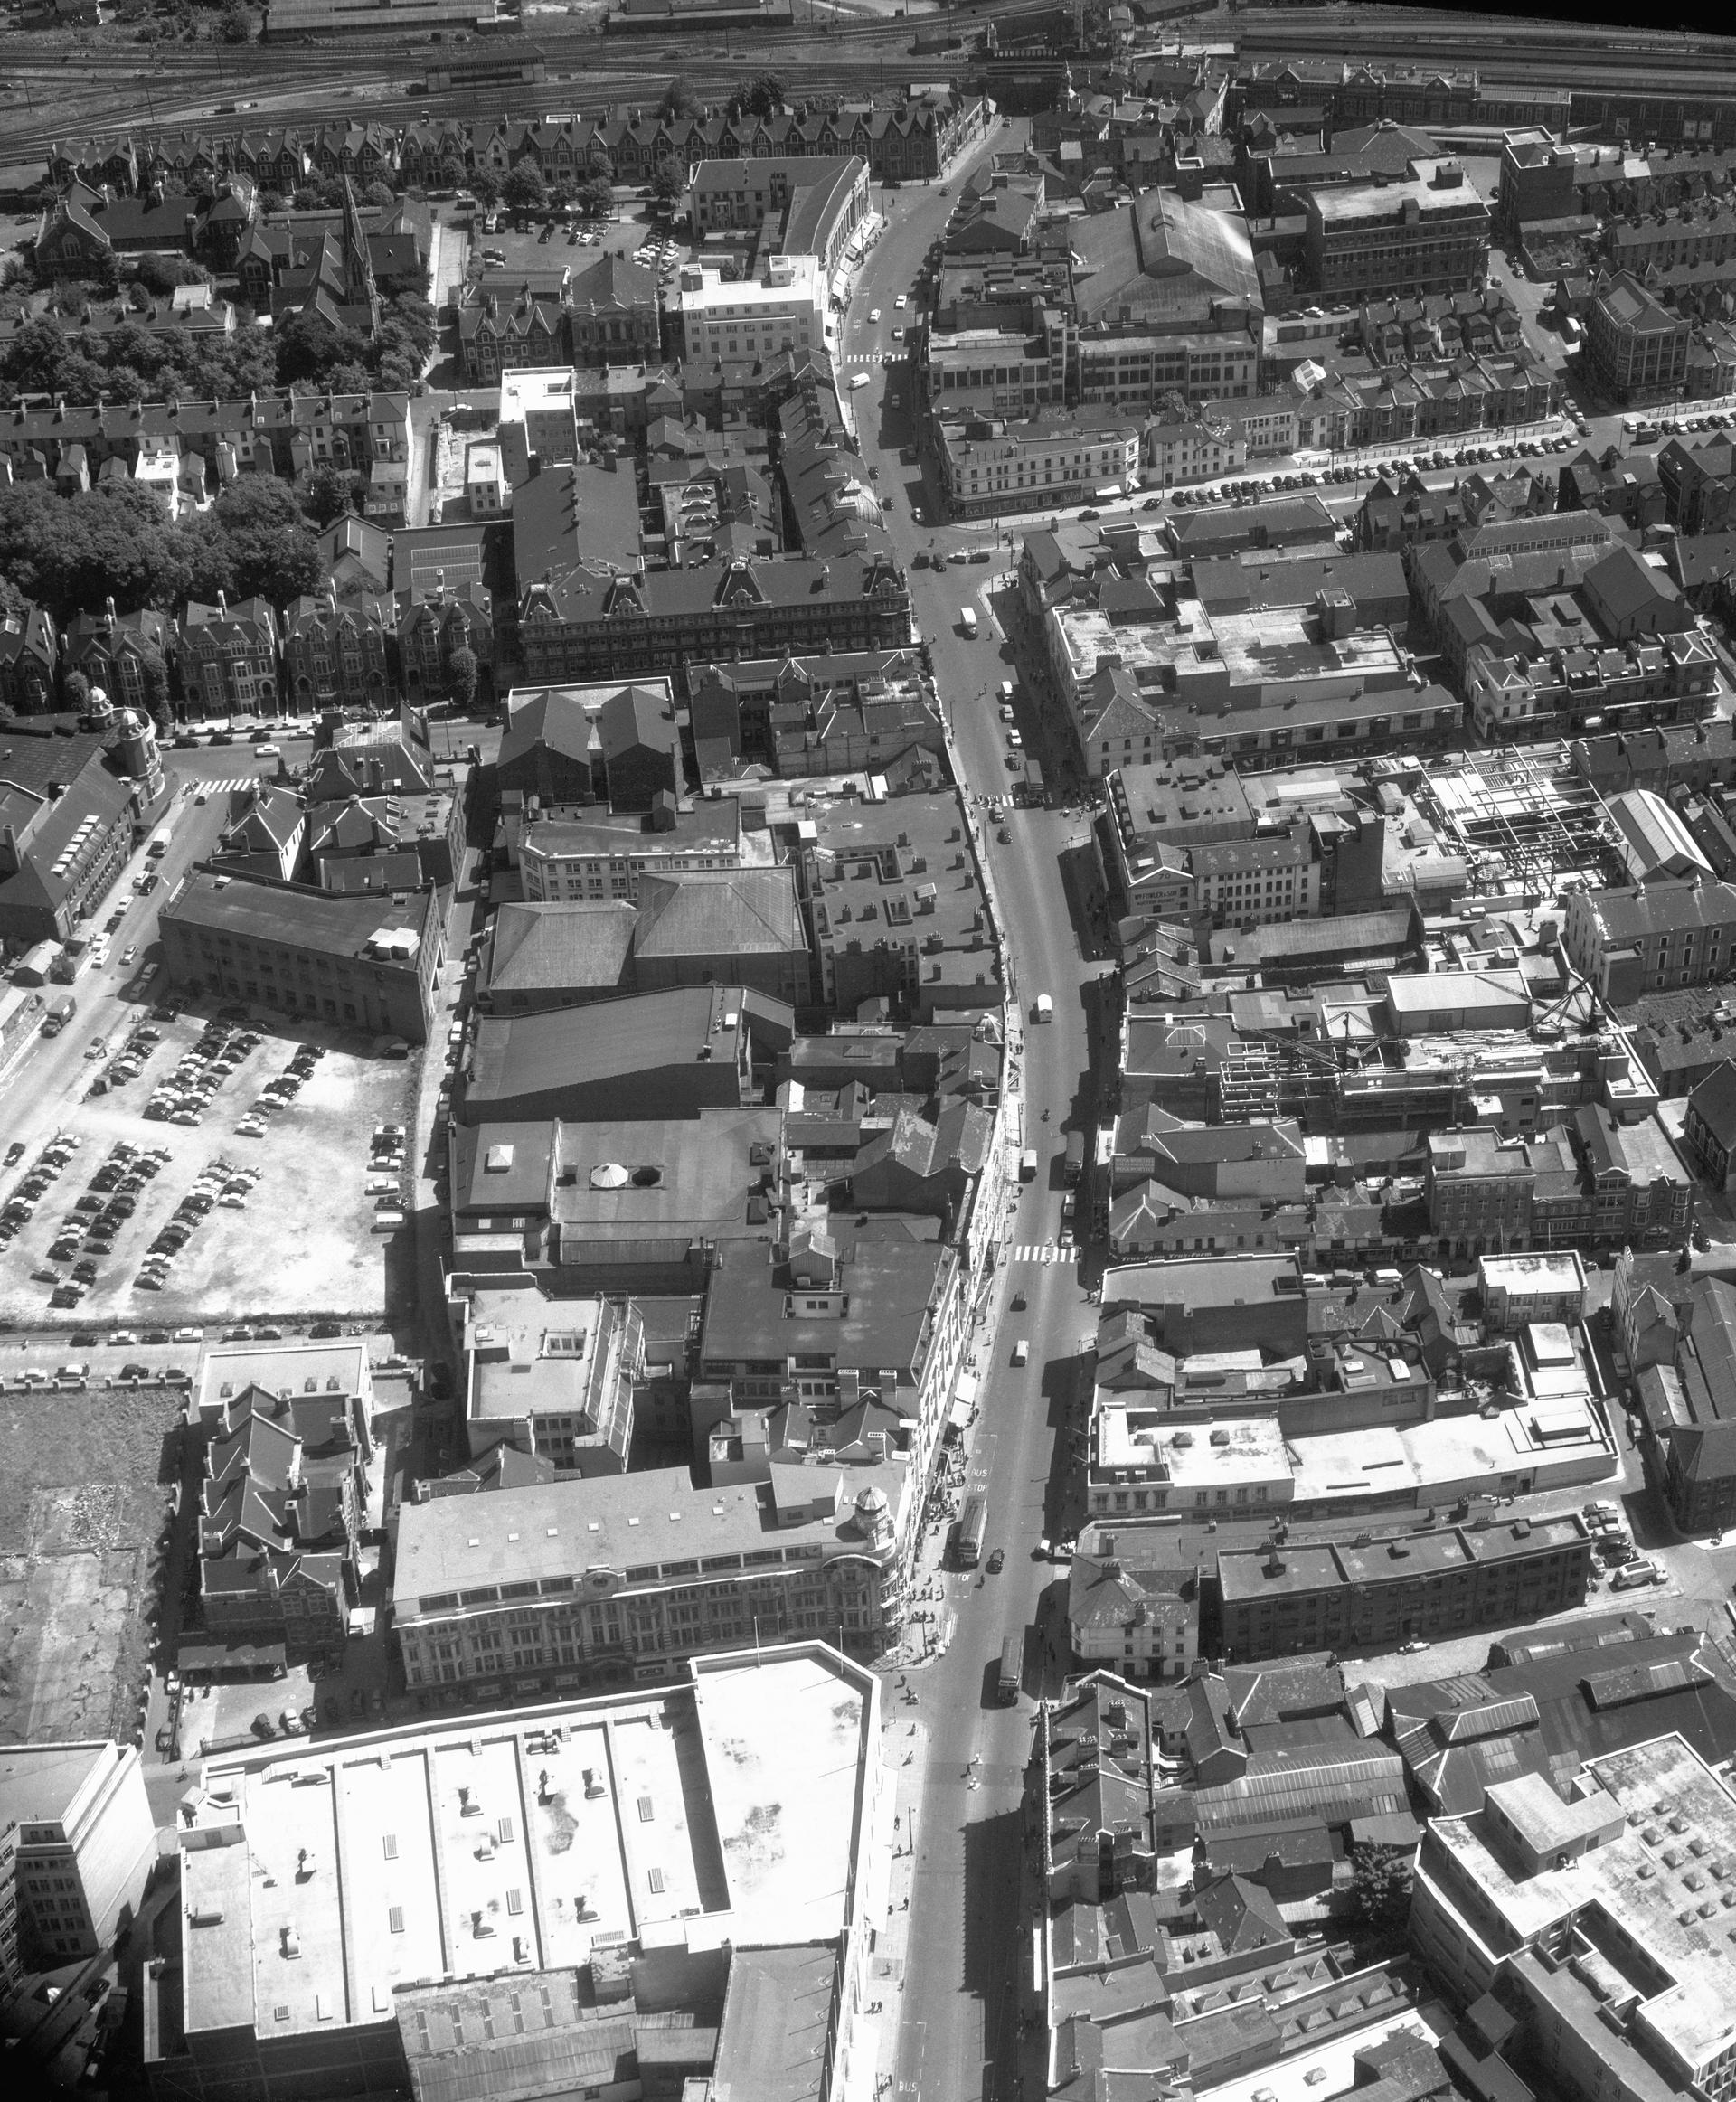 Aerial photo of Queen Street Cardiff from the mid 20th Century